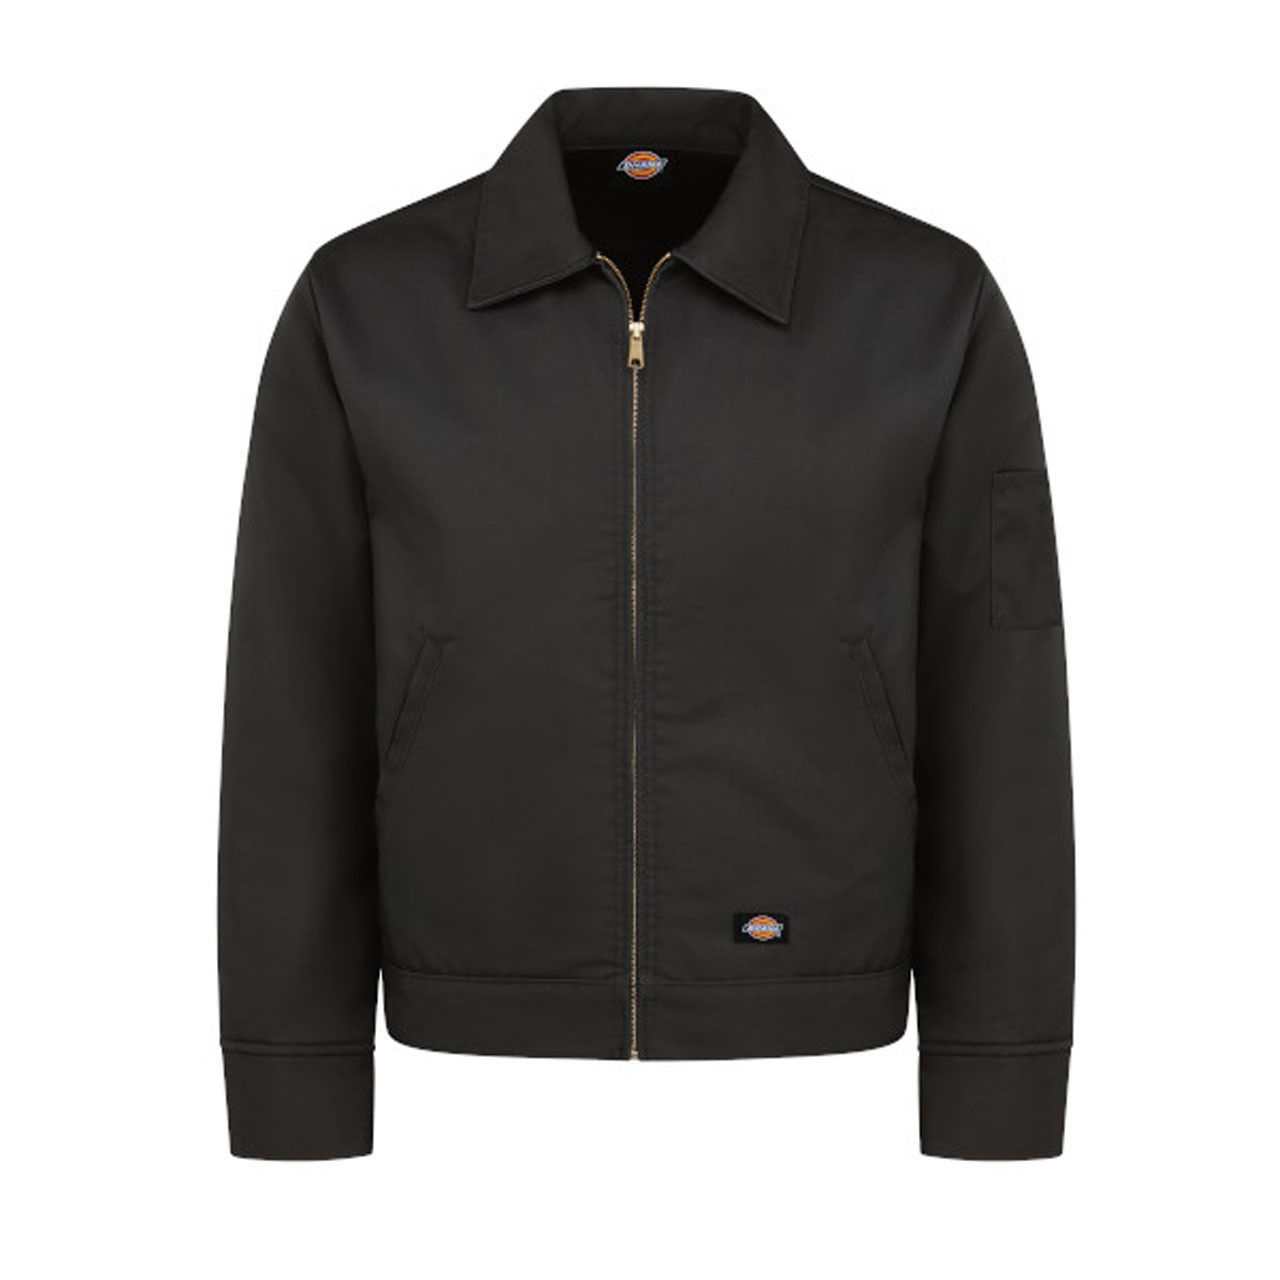 What is the weight of the body and lining materials in the black Dickies jacket?